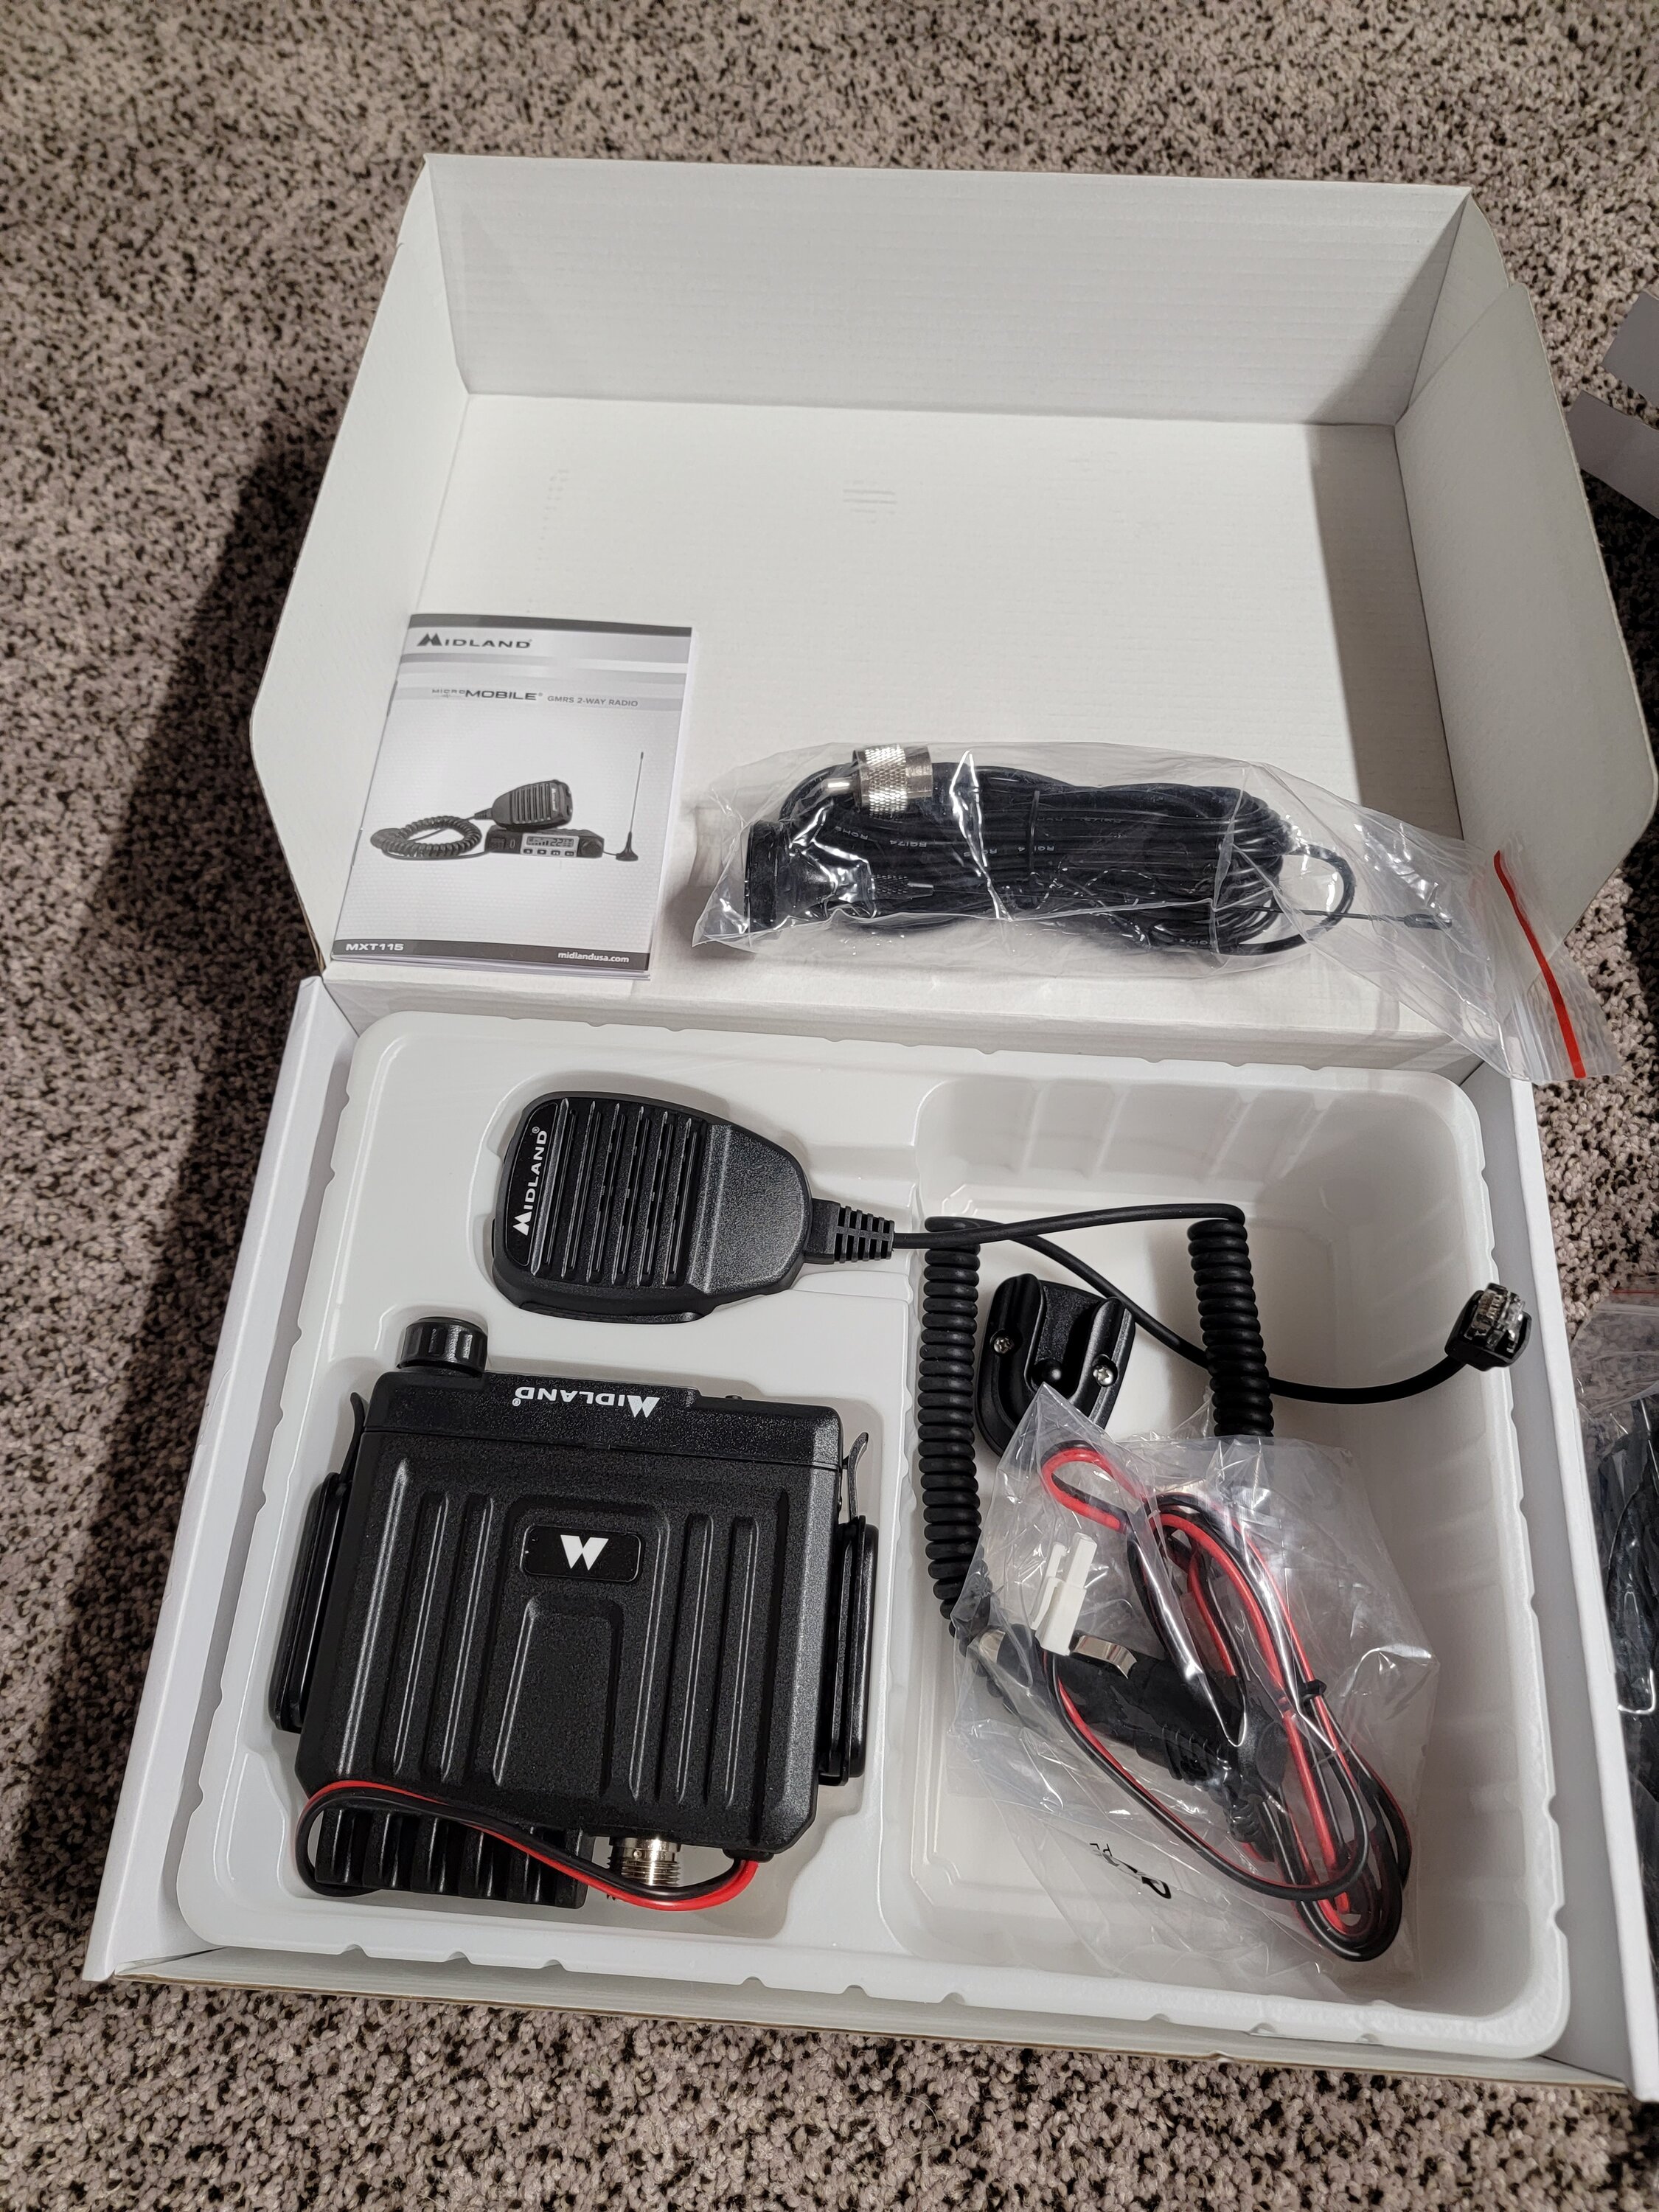 Ford Bronco 2 brand new, never installed GMRS Midland radios for sale. 20220806_141106